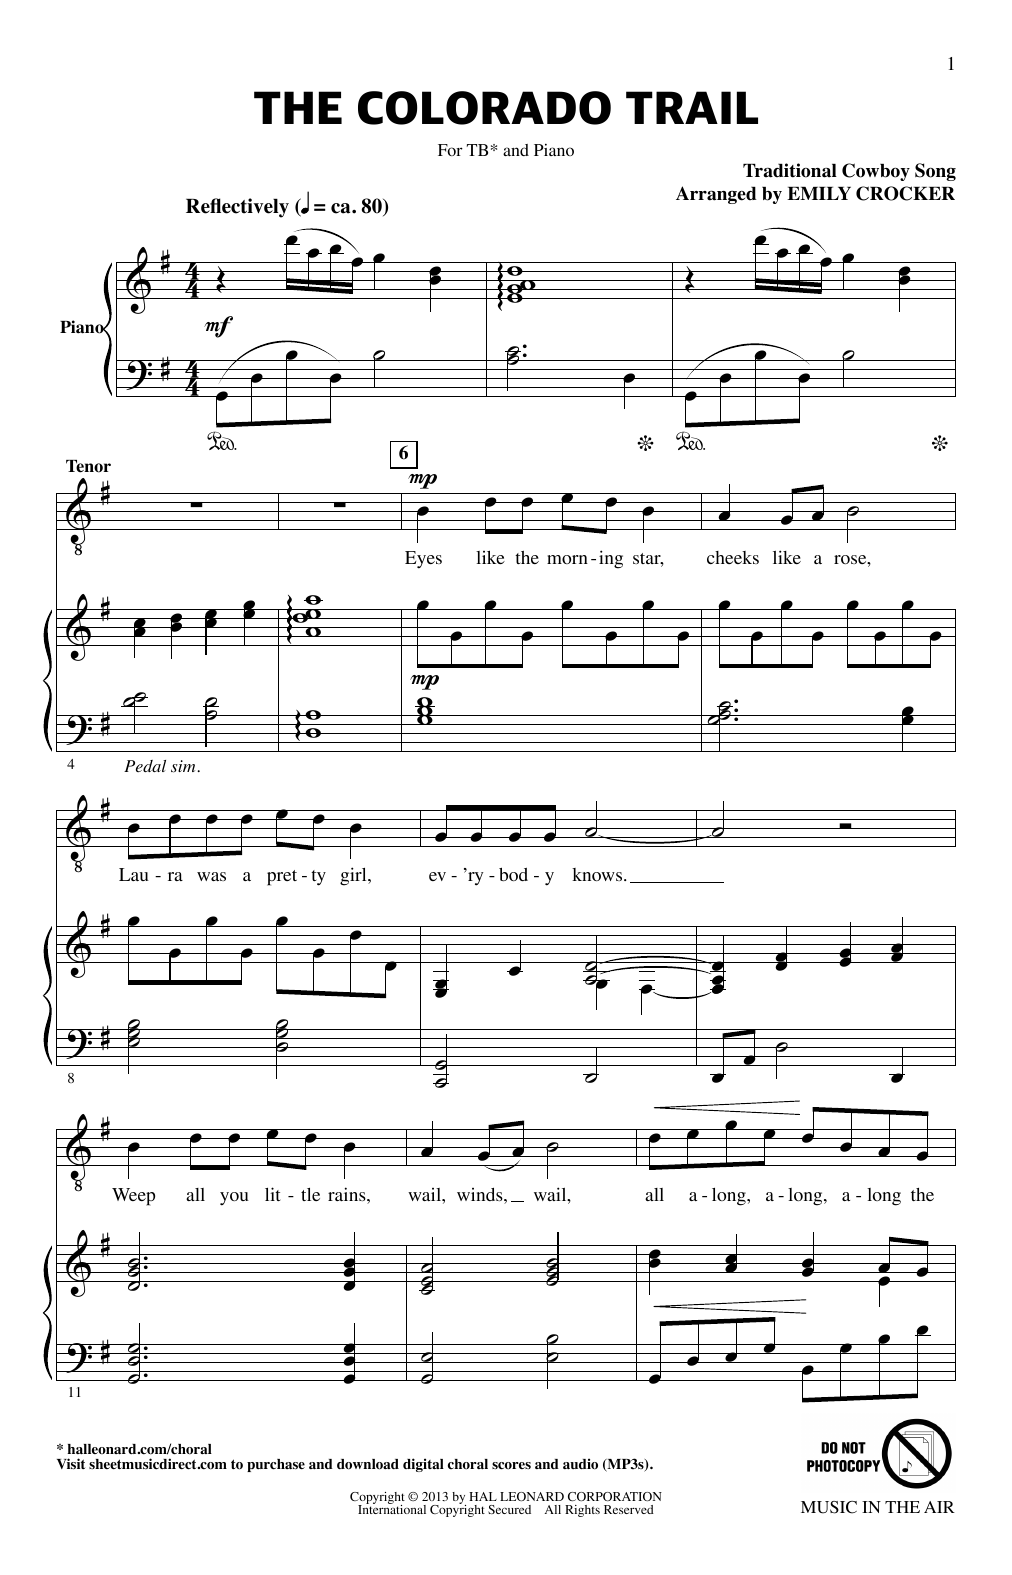 Emily Crocker The Colorado Trail (from Music In The Air) sheet music notes and chords. Download Printable PDF.